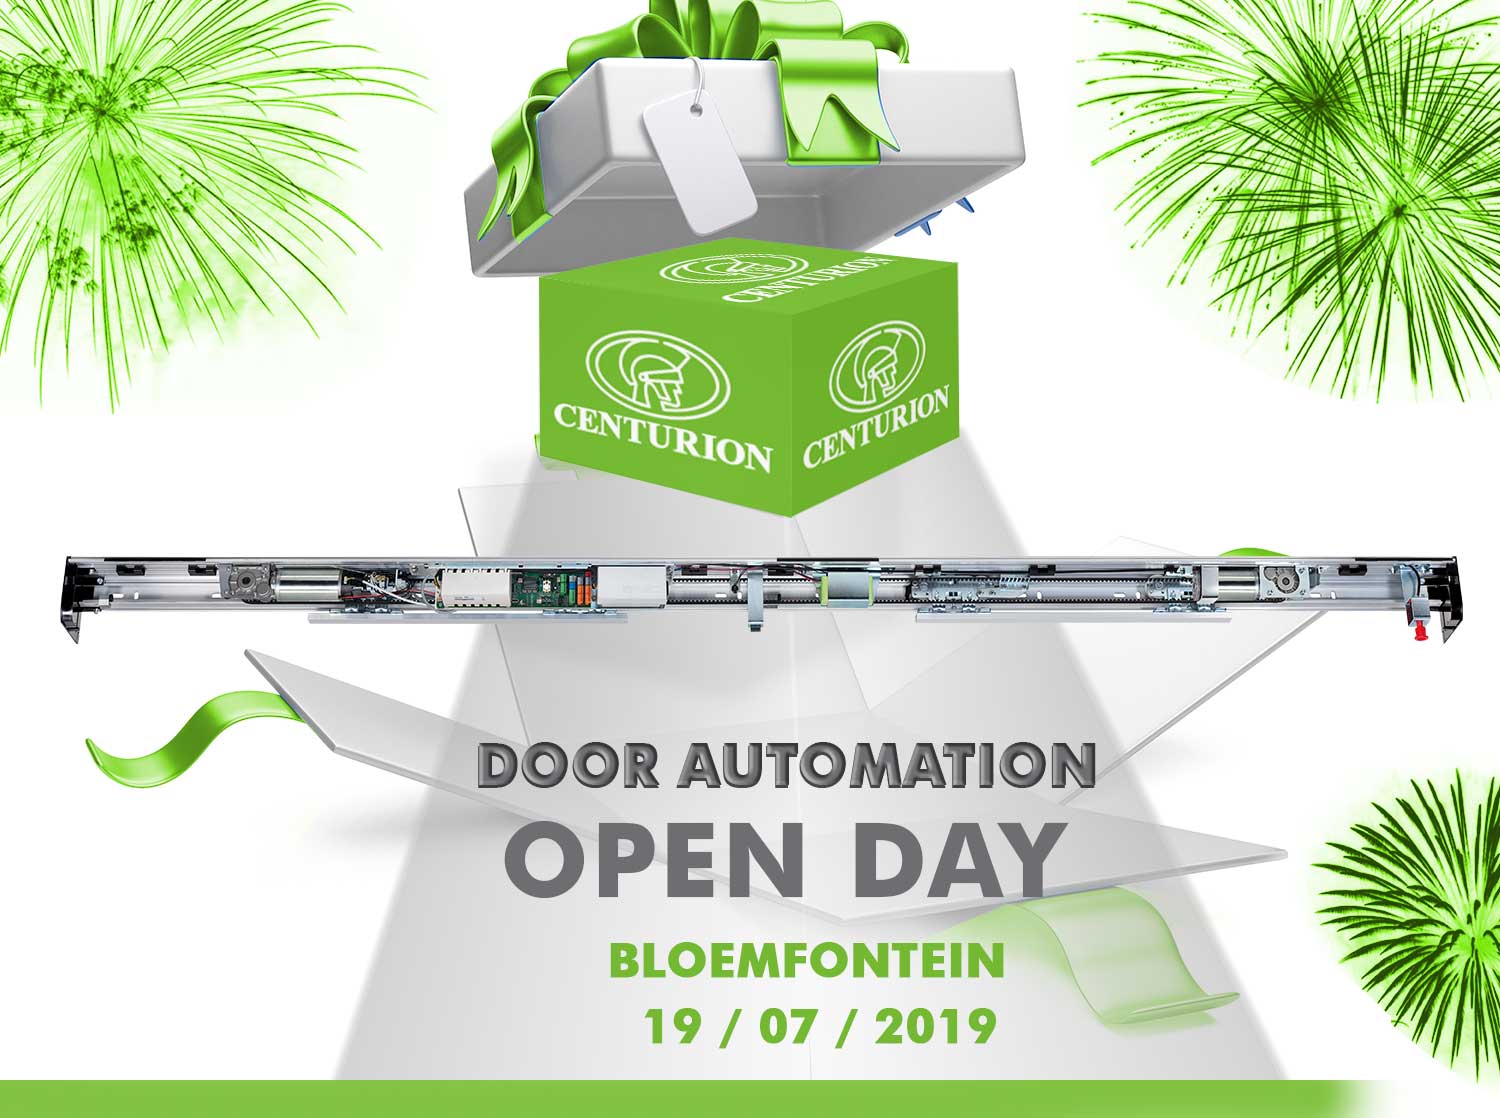 You’re invited, the CENTURION door automation open day!